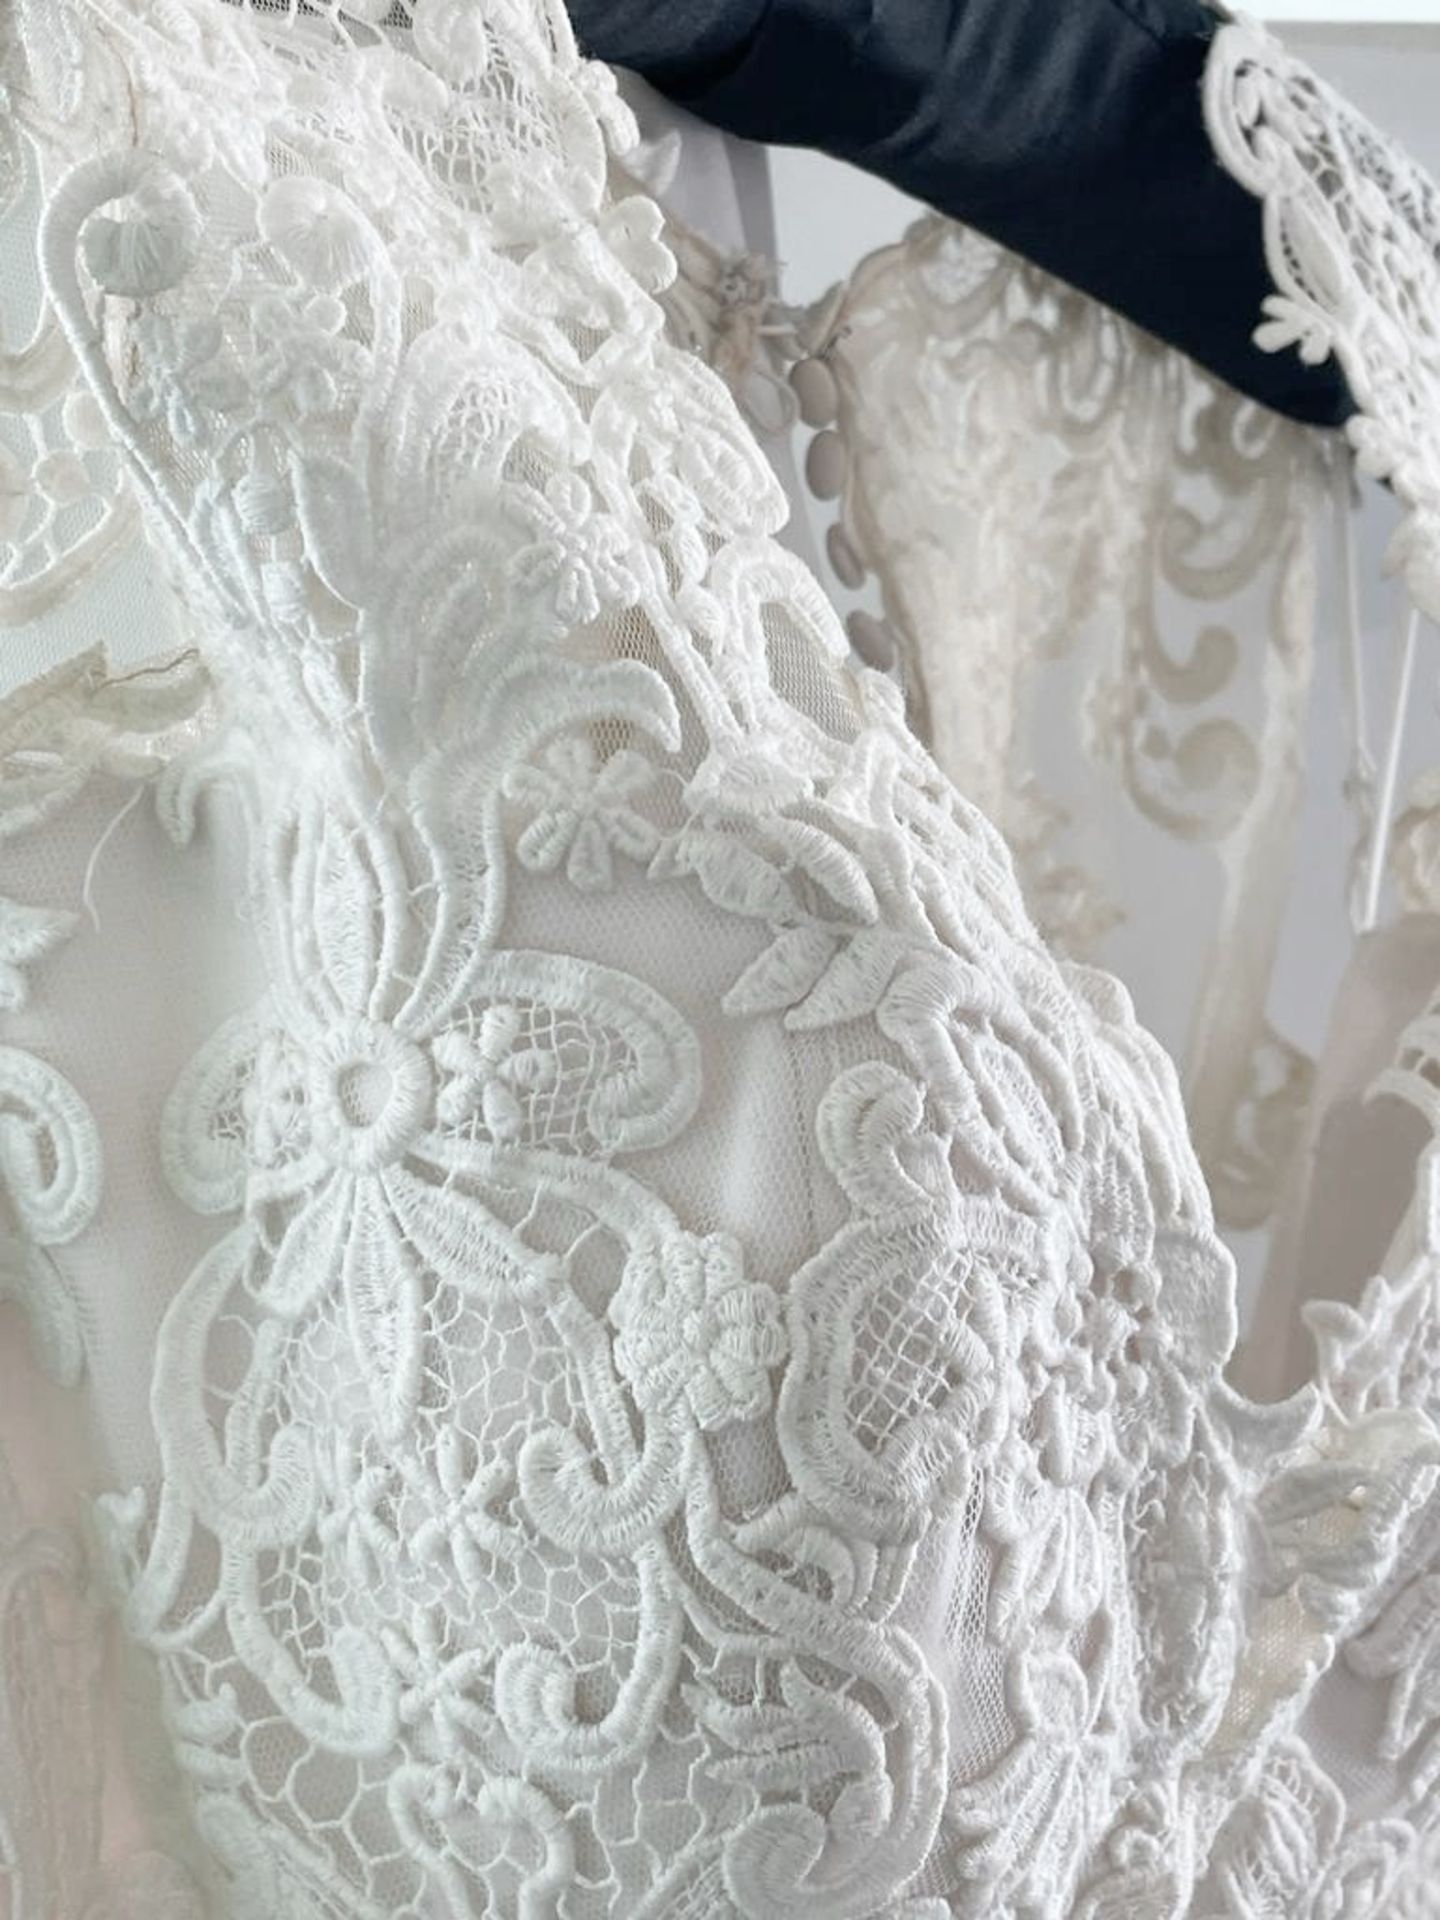 1 x LILIAN WEST 'Kate' Designer Crochet Lace Sweetheart Wedding Dress Bridal Gown, With Silk Flowing - Image 9 of 14